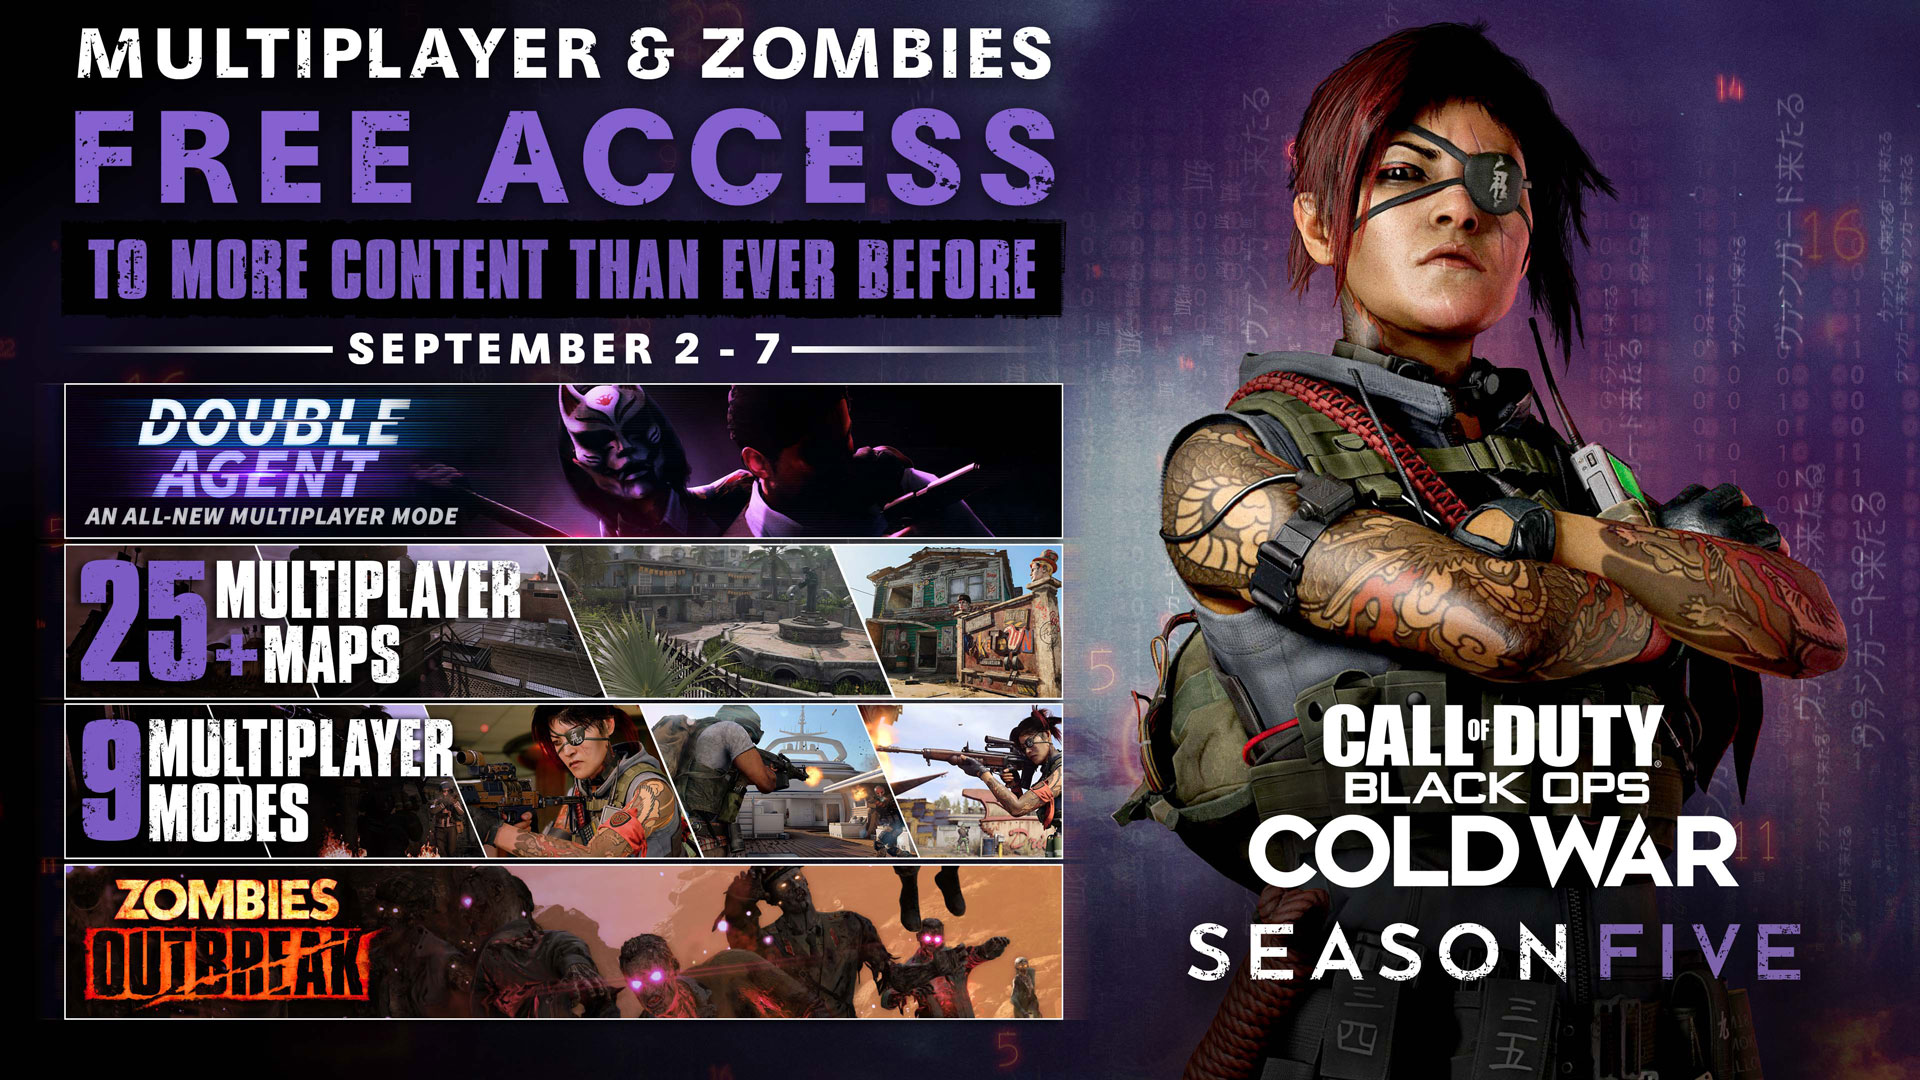 Play Call of Duty: Black Ops Cold War free starting September 2